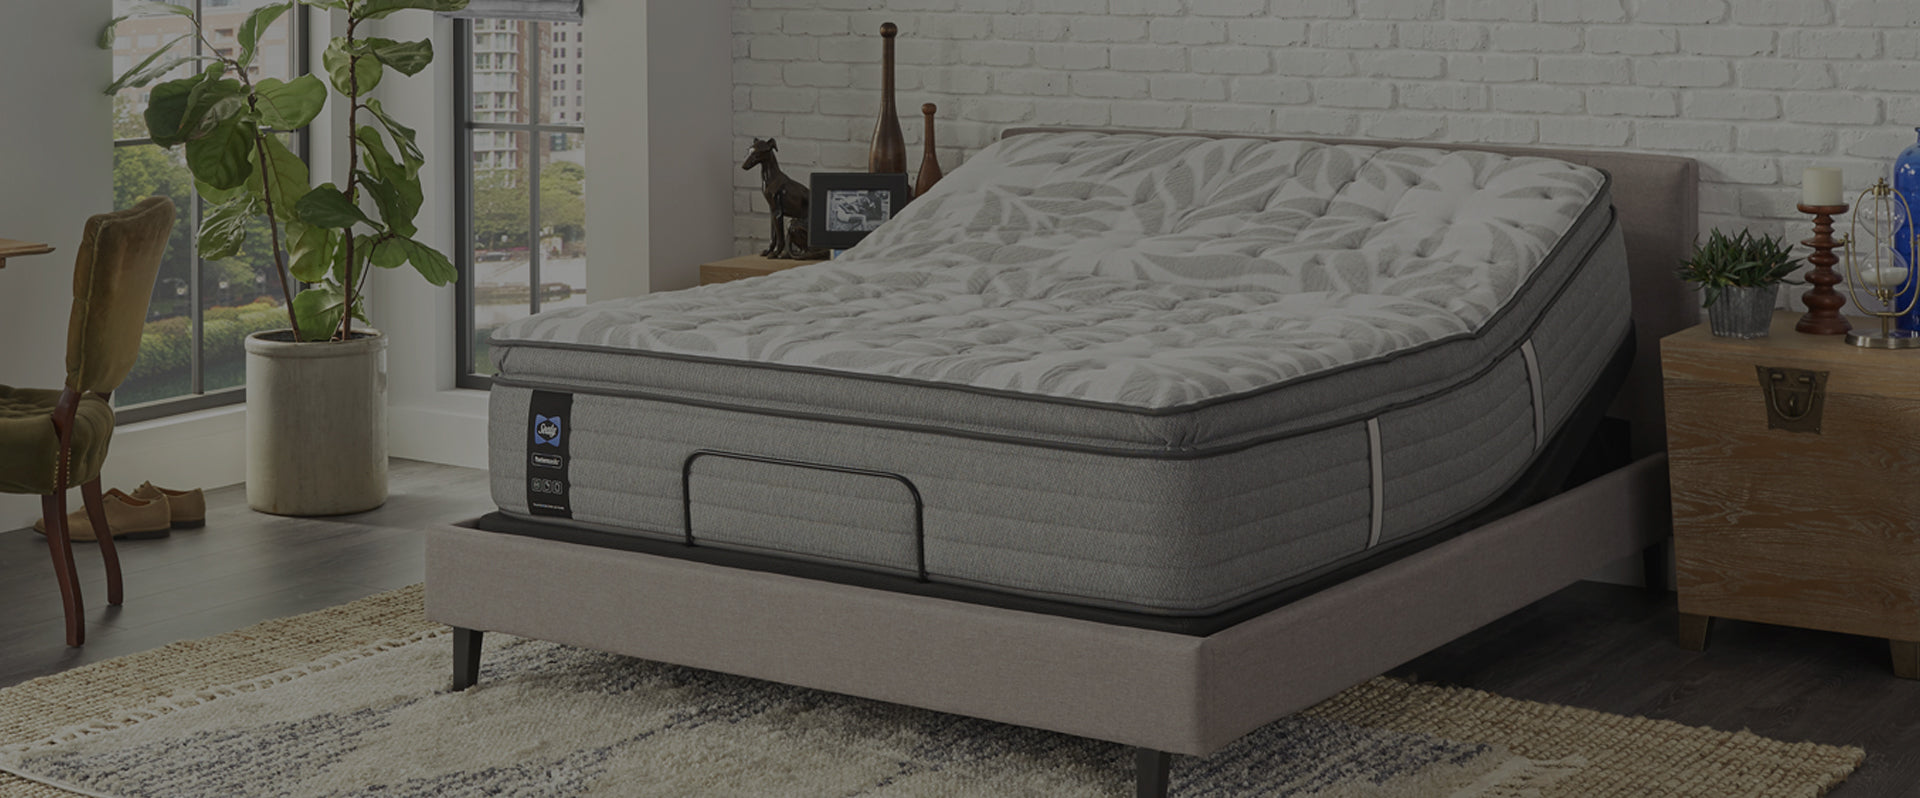 gray Sealy mattress on an adjustable base in a bedroom scene